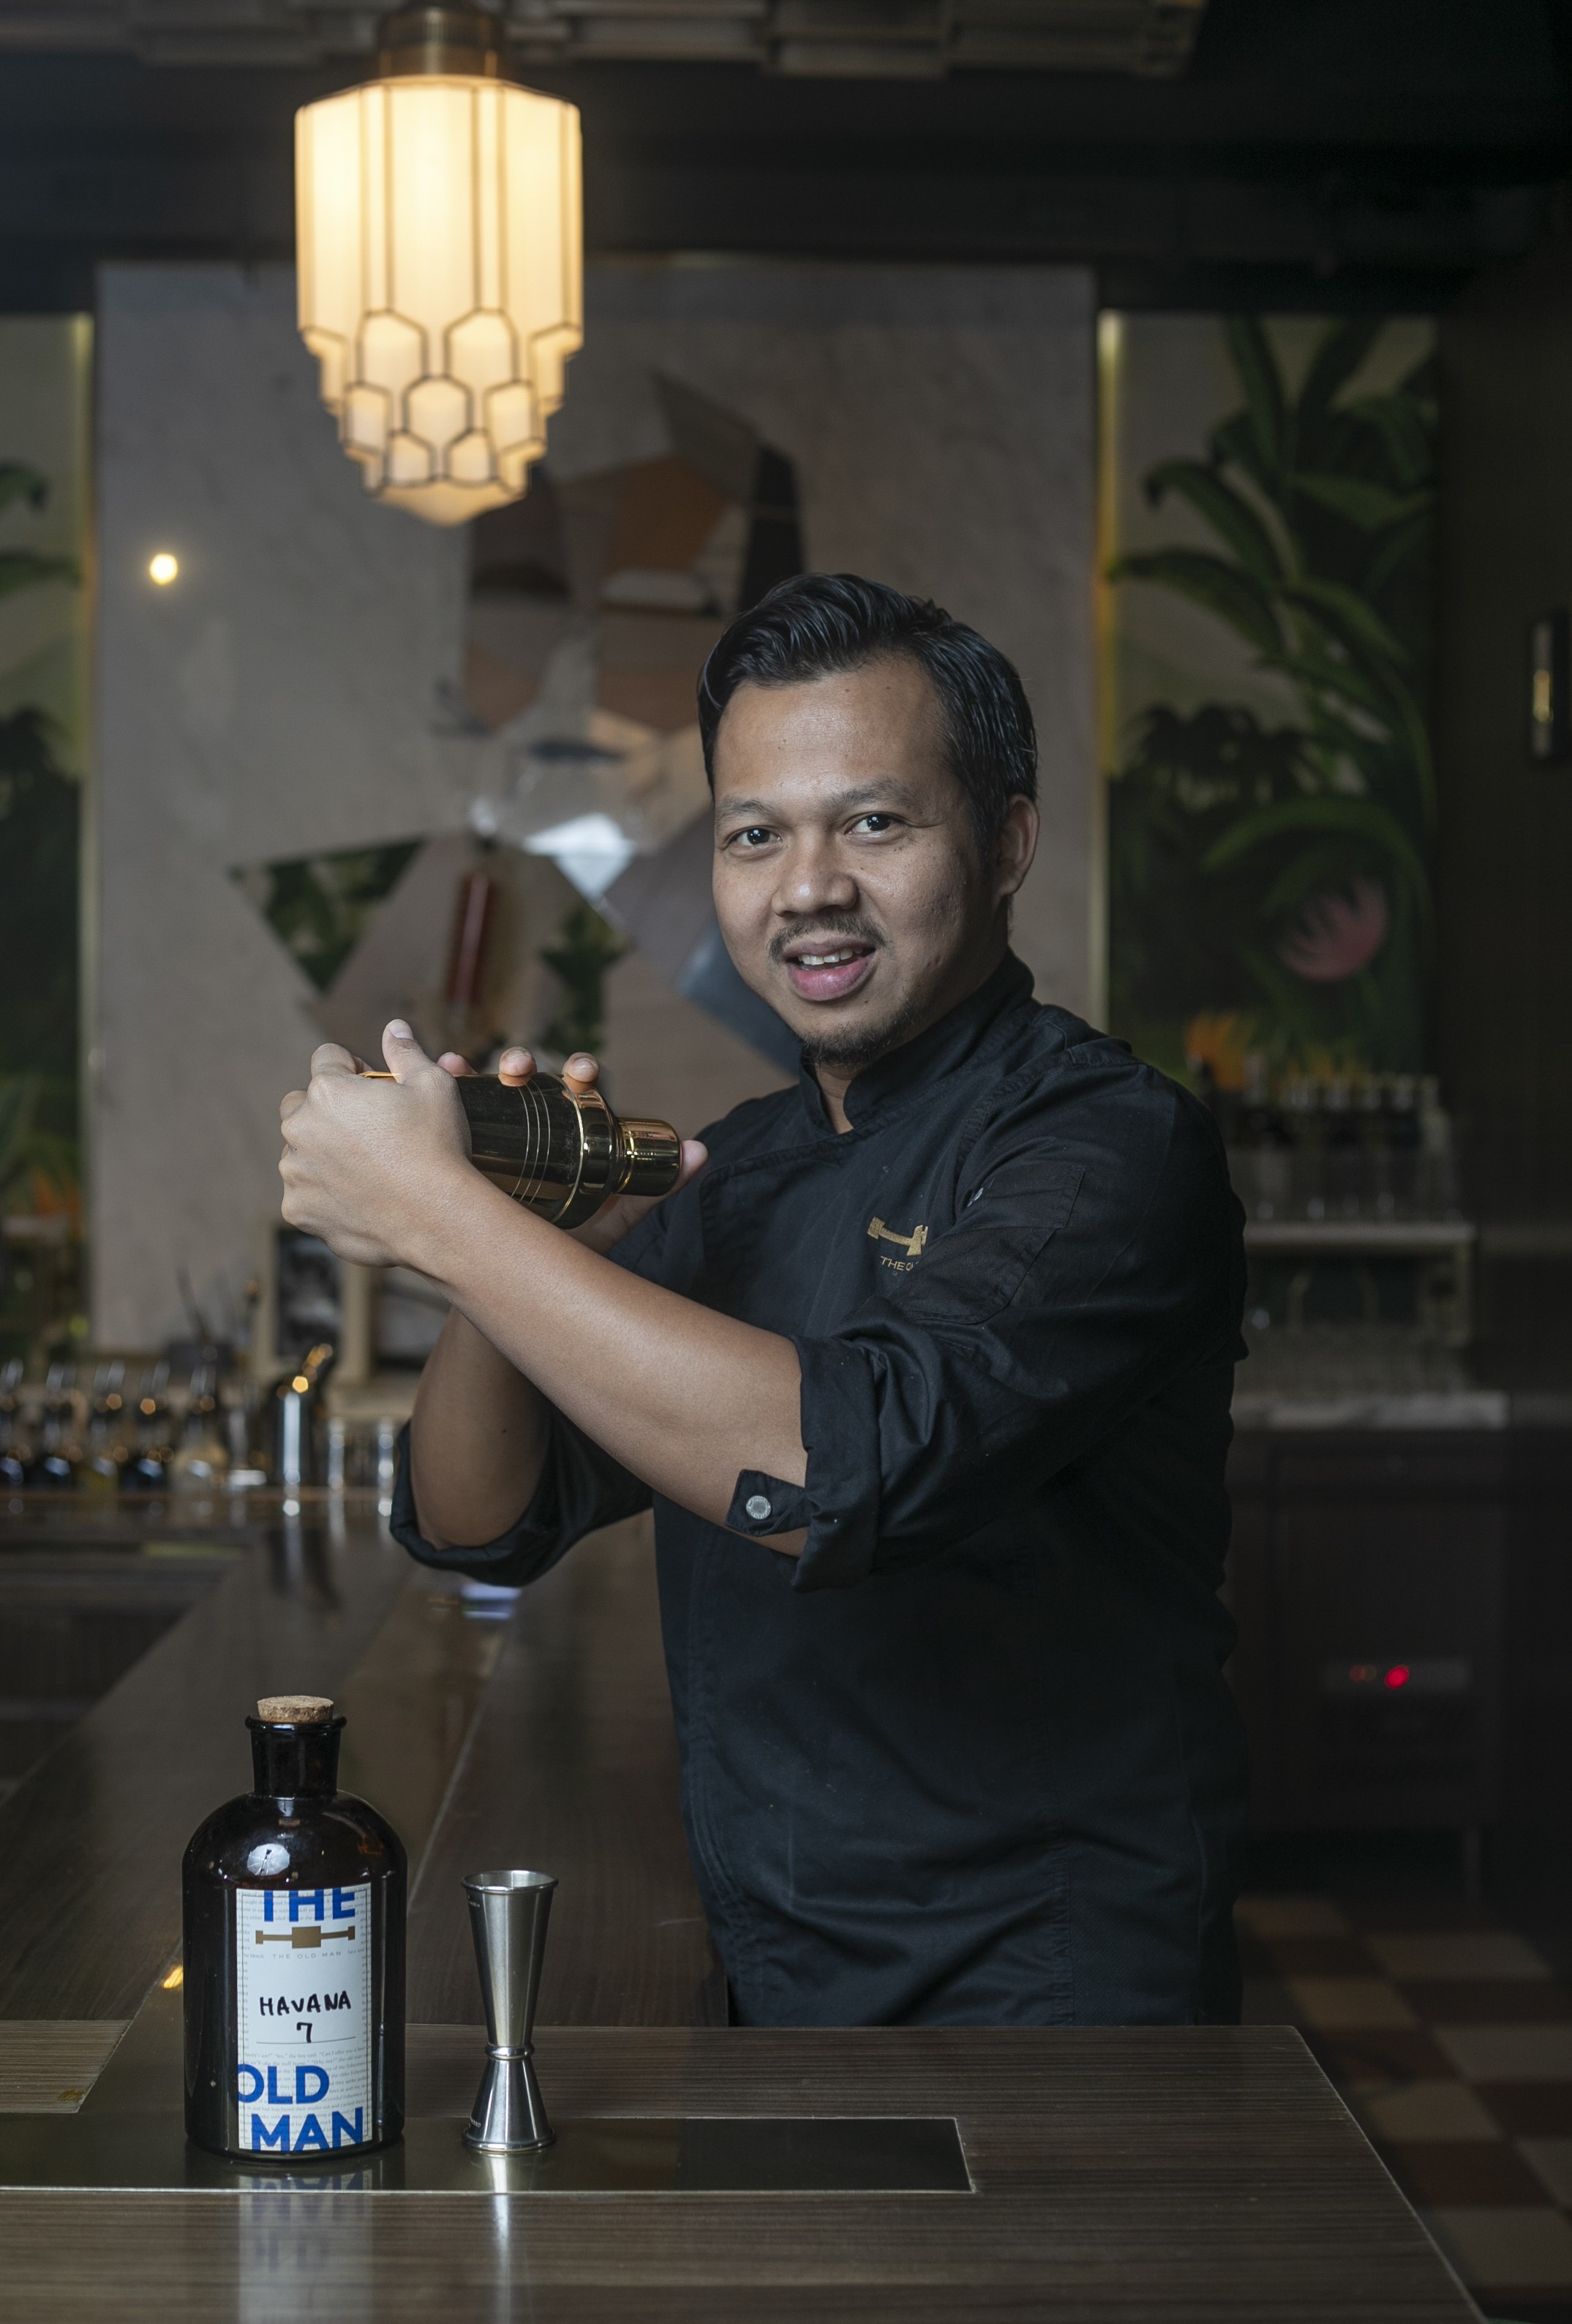 Agung Prabowo mixes a Hemingway daiquiri at The Old Man, in Central. Picture: Antony Dickson